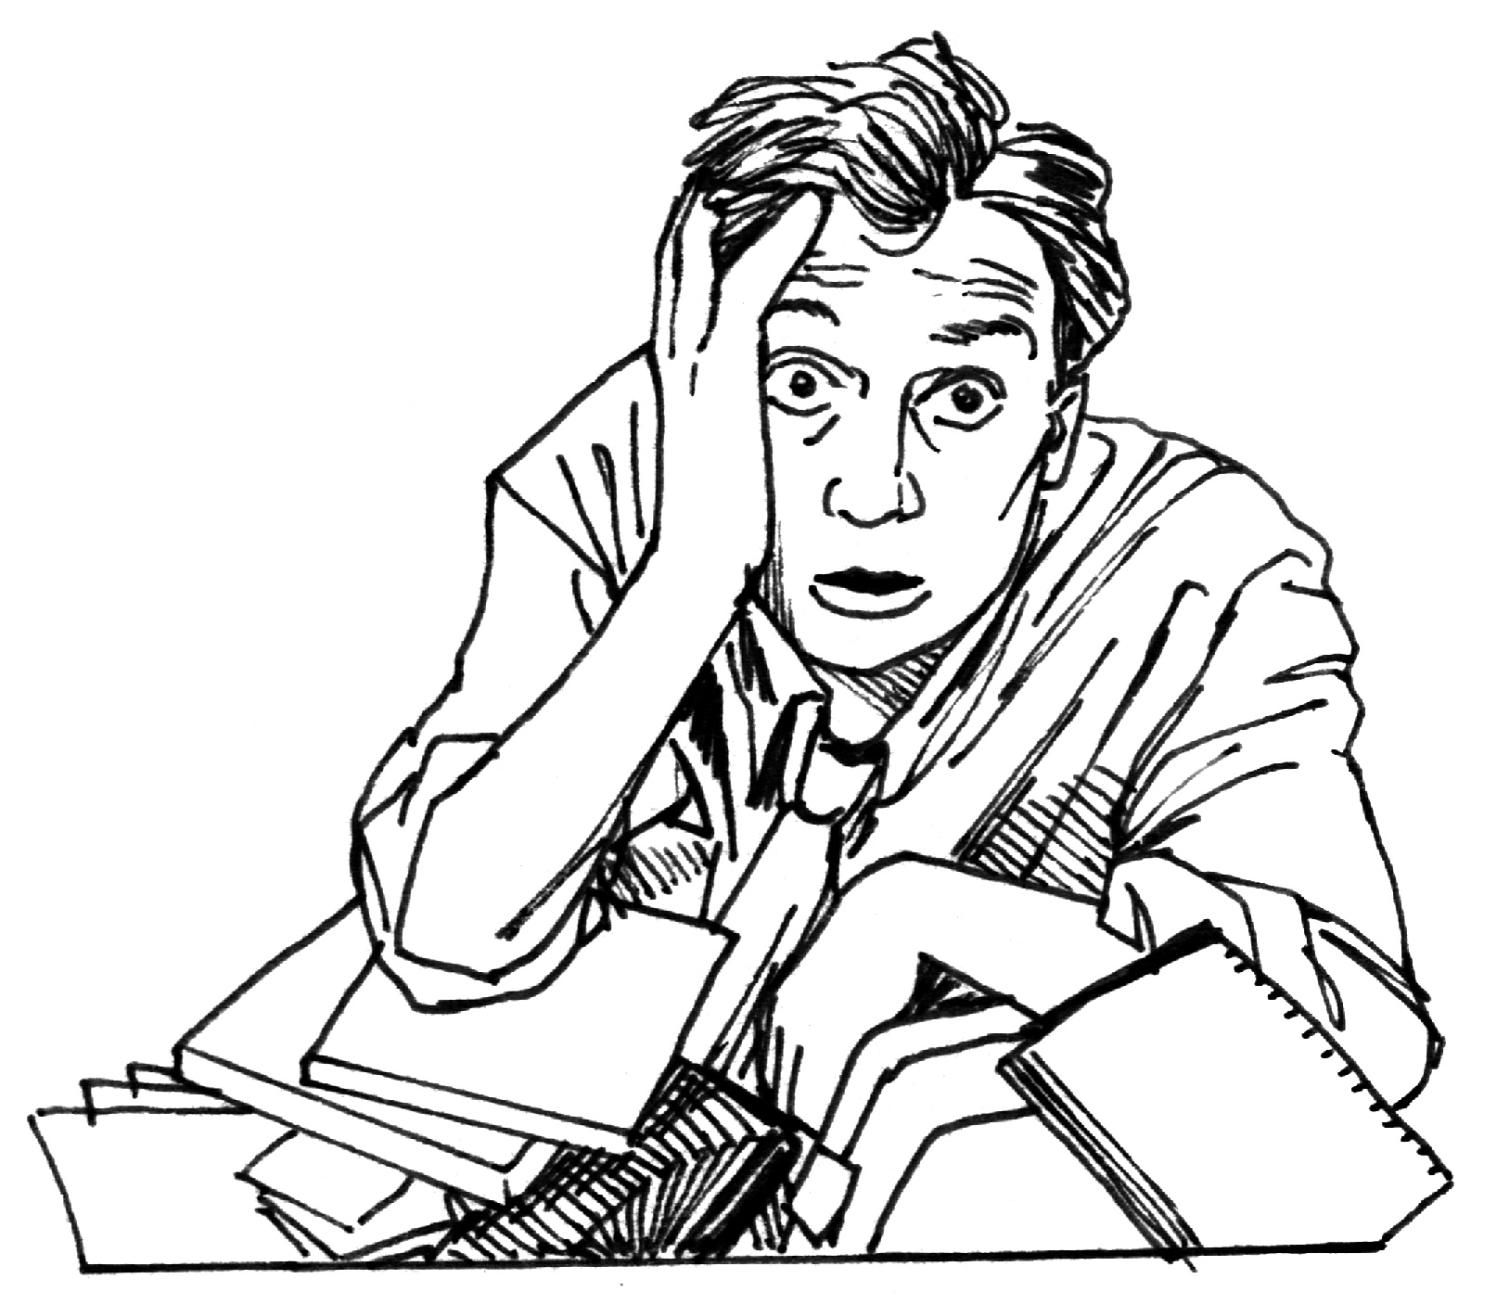 Pics Of Stressed Out People - ClipArt Best